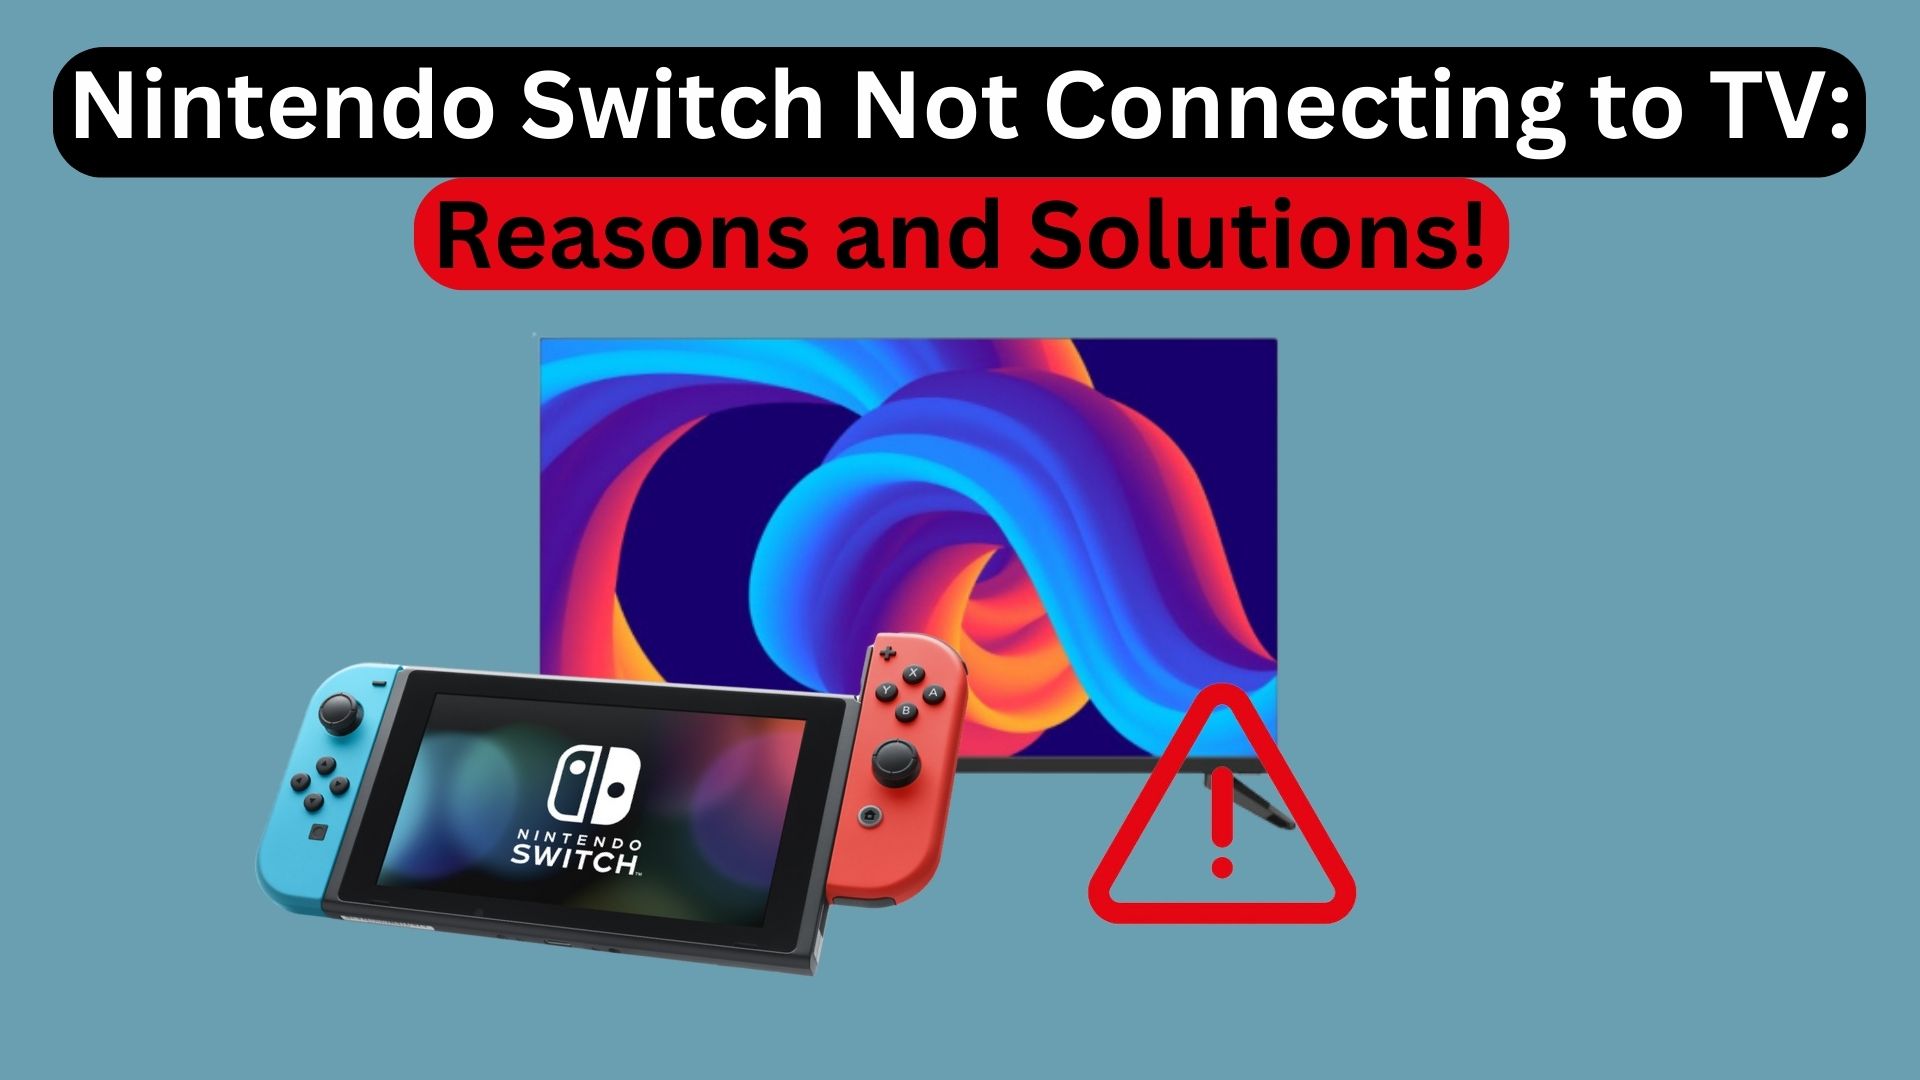 Nintendo Switch Not Connecting to TV: Reasons and Solutions!